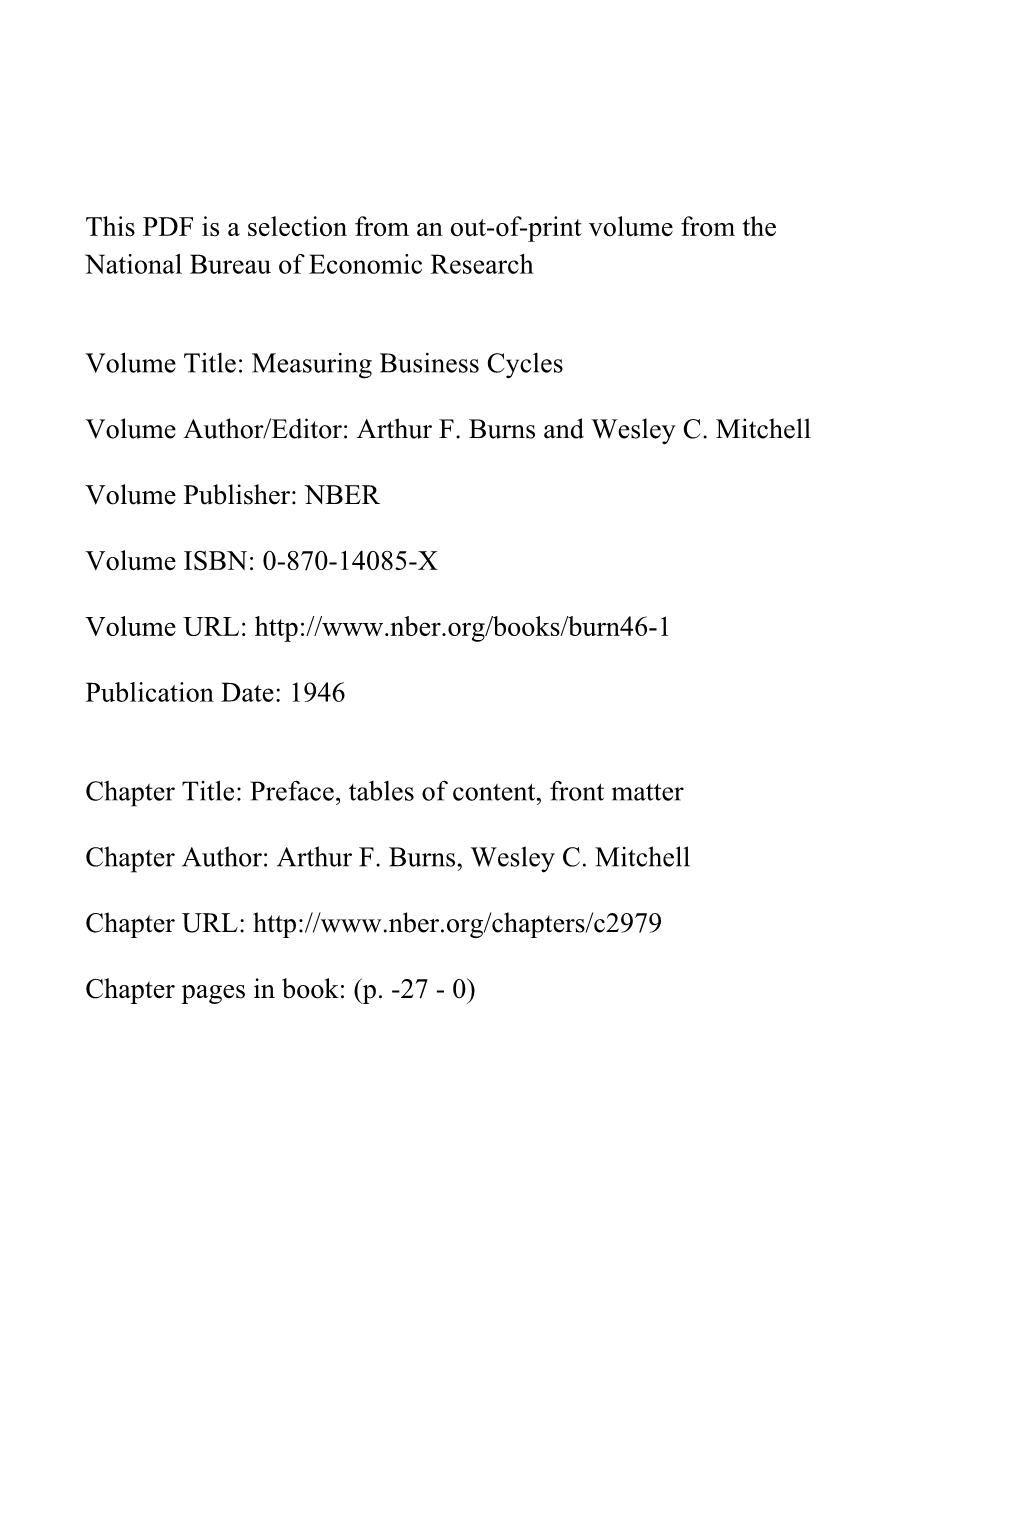 Preface, Tables of Content, Front Matter